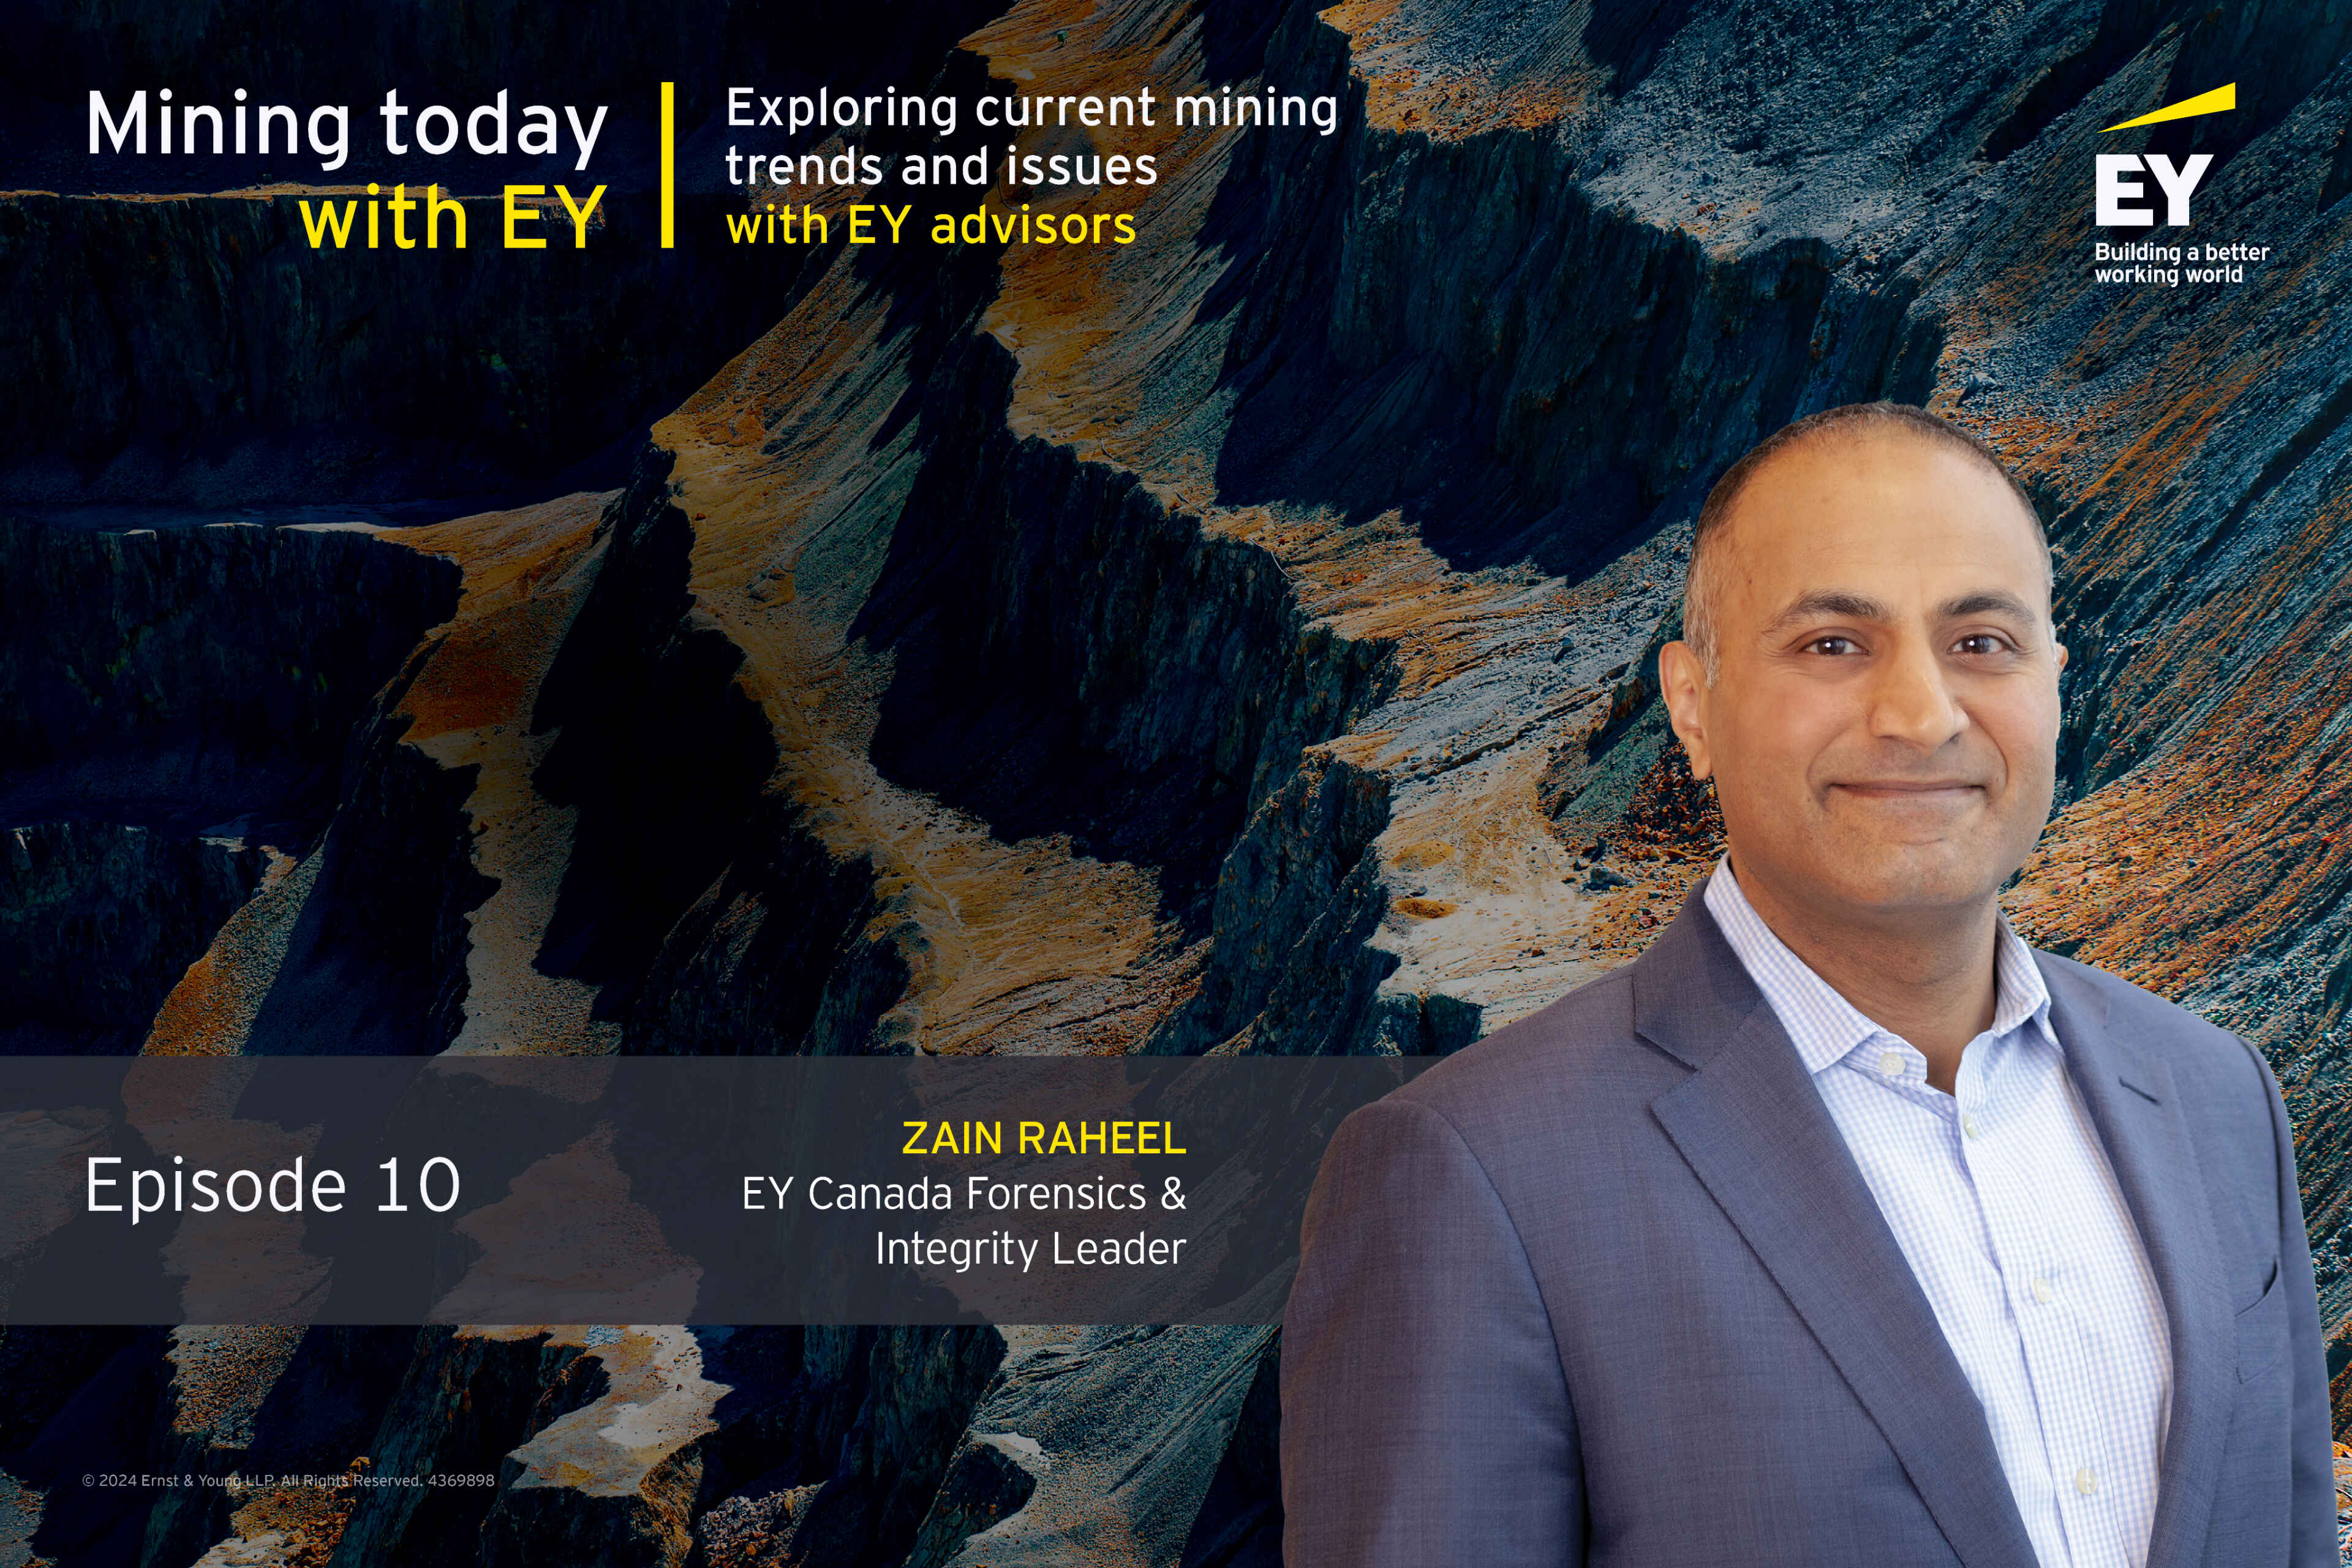 Mining today with EY – EP 10: Forensics trends in mining and metals